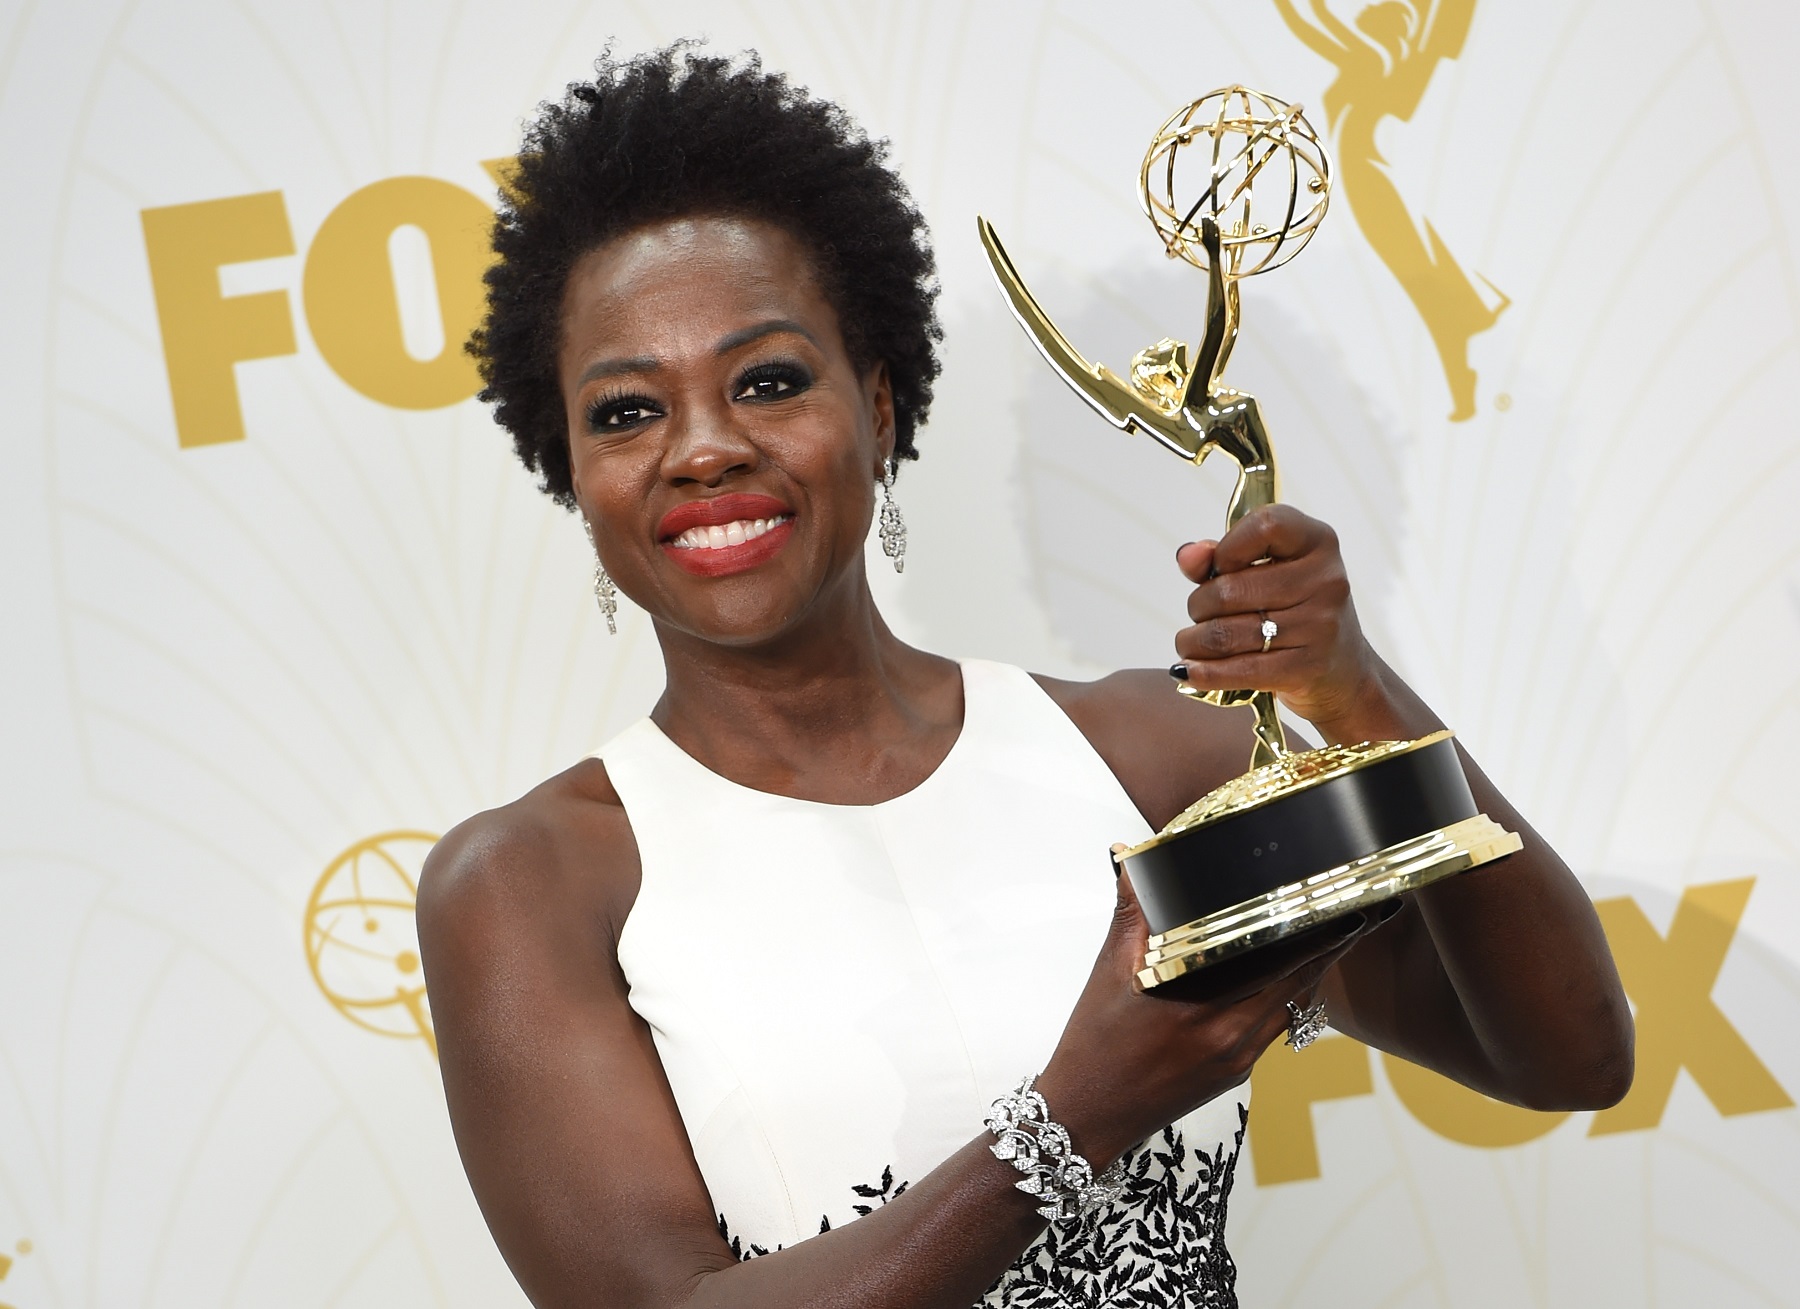 Viola Davis poses with the Emmy for Outstanding Lead Actress in a Drama Series, in the press room during the 67th Emmy Awards, September 20, 2015 at the Microsoft Theatre in downtown Los Angeles. AFP PHOTO / VALERIE MACON / AFP PHOTO / VALERIE MACON